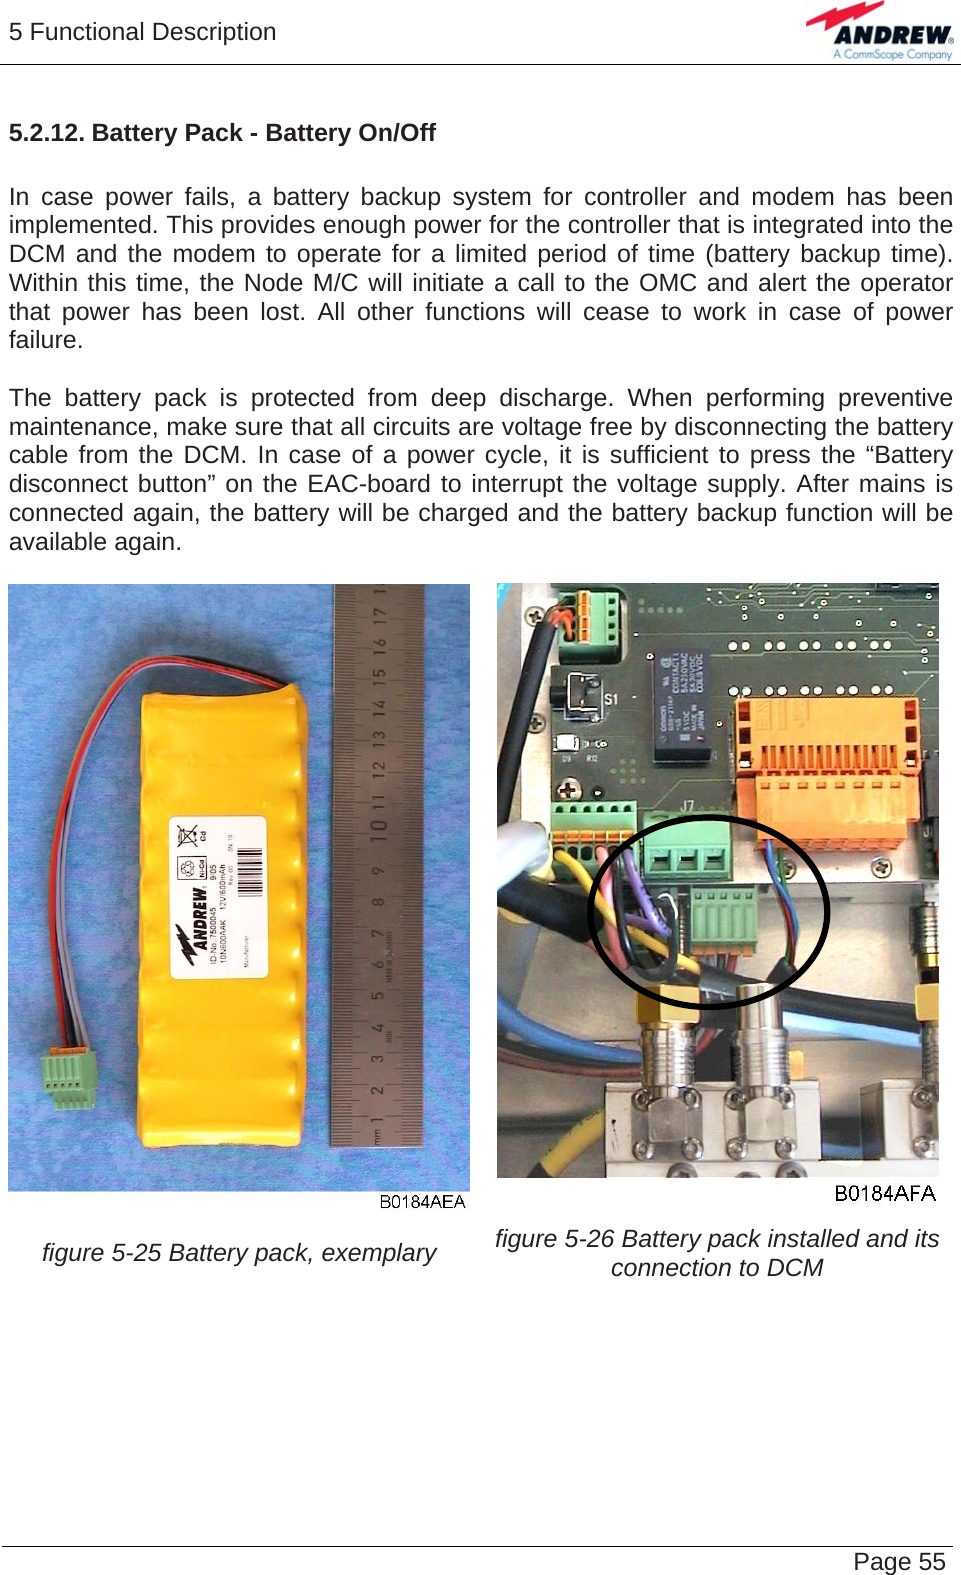 5 Functional Description   Page 555.2.12. Battery Pack - Battery On/Off  In case power fails, a battery backup system for controller and modem has been implemented. This provides enough power for the controller that is integrated into the DCM and the modem to operate for a limited period of time (battery backup time). Within this time, the Node M/C will initiate a call to the OMC and alert the operator that power has been lost. All other functions will cease to work in case of power failure.  The battery pack is protected from deep discharge. When performing preventive maintenance, make sure that all circuits are voltage free by disconnecting the battery cable from the DCM. In case of a power cycle, it is sufficient to press the “Battery disconnect button” on the EAC-board to interrupt the voltage supply. After mains is connected again, the battery will be charged and the battery backup function will be available again.   figure 5-25 Battery pack, exemplary  figure 5-26 Battery pack installed and its connection to DCM   